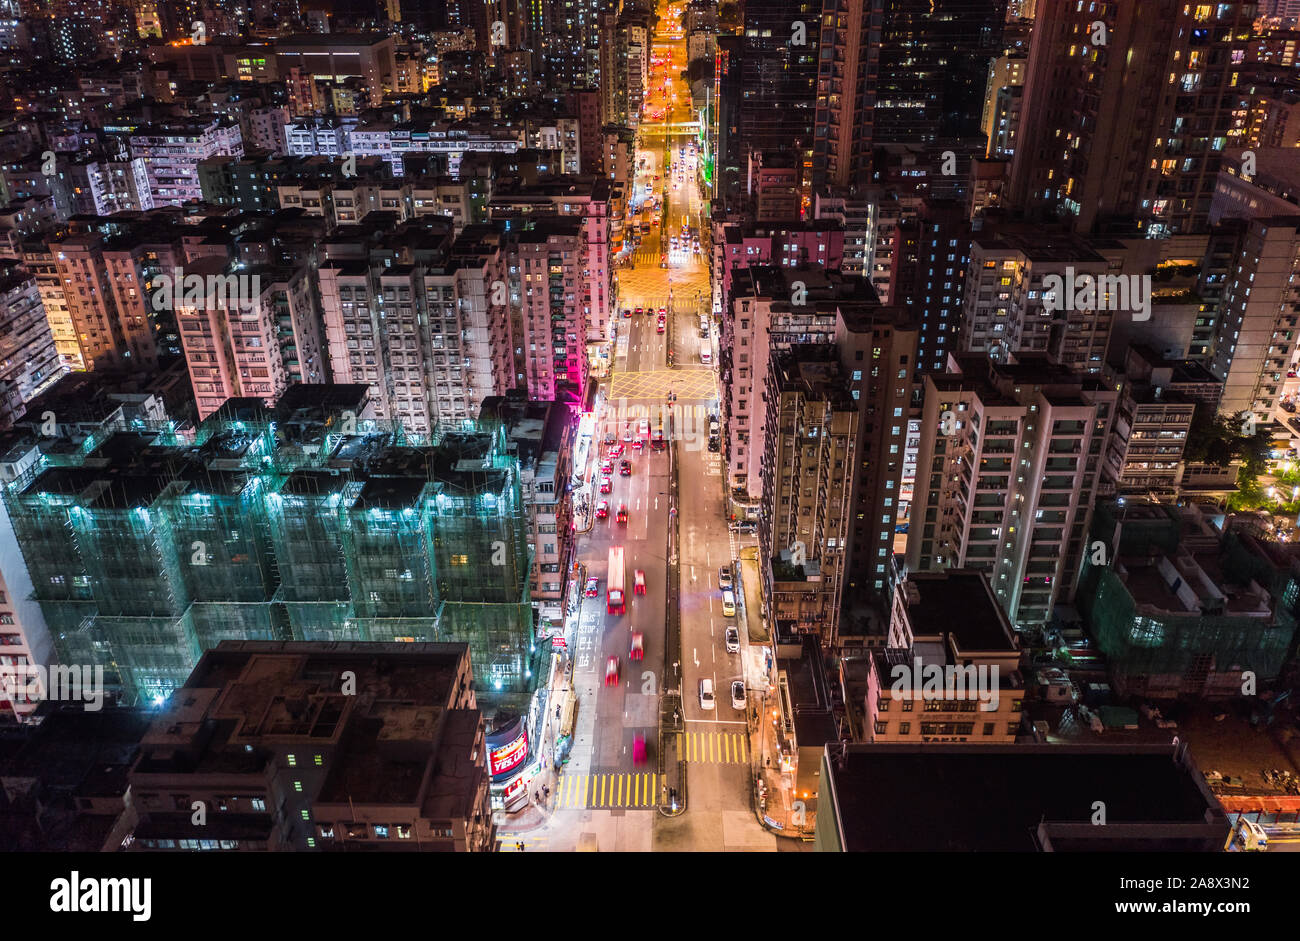 Car, taxi, and bus traffic on road intersection at night in Hong Kong downtown district, drone aerial top view. Street commuter Asia city life concept Stock Photo